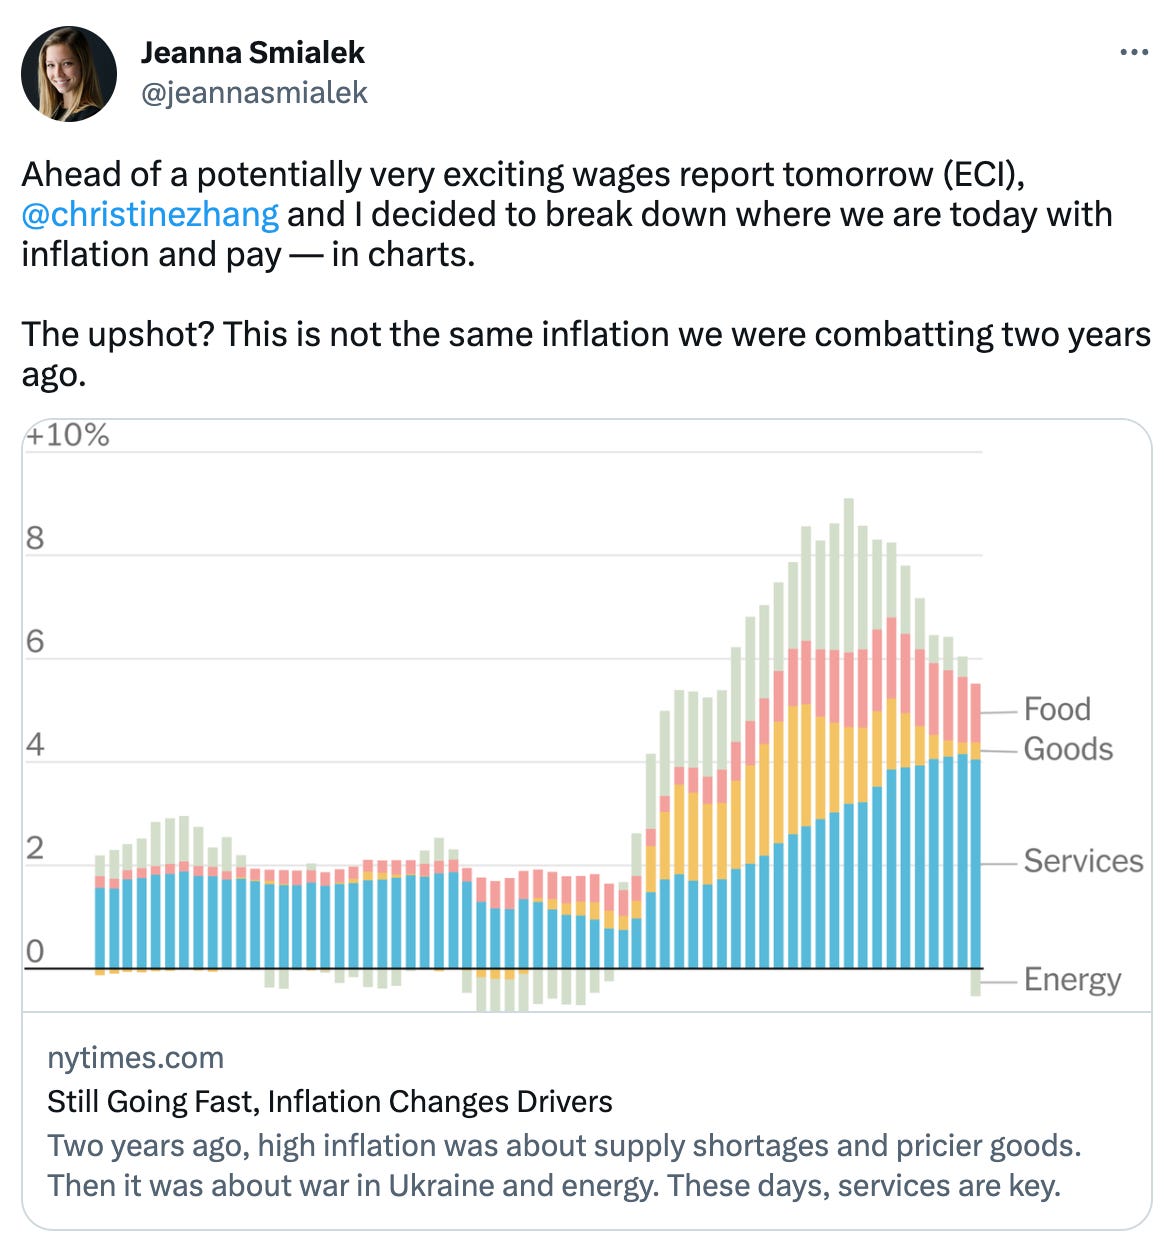  Jeanna Smialek @jeannasmialek Ahead of a potentially very exciting wages report tomorrow (ECI),  @christinezhang  and I decided to break down where we are today with inflation and pay — in charts.   The upshot? This is not the same inflation we were combatting two years ago.